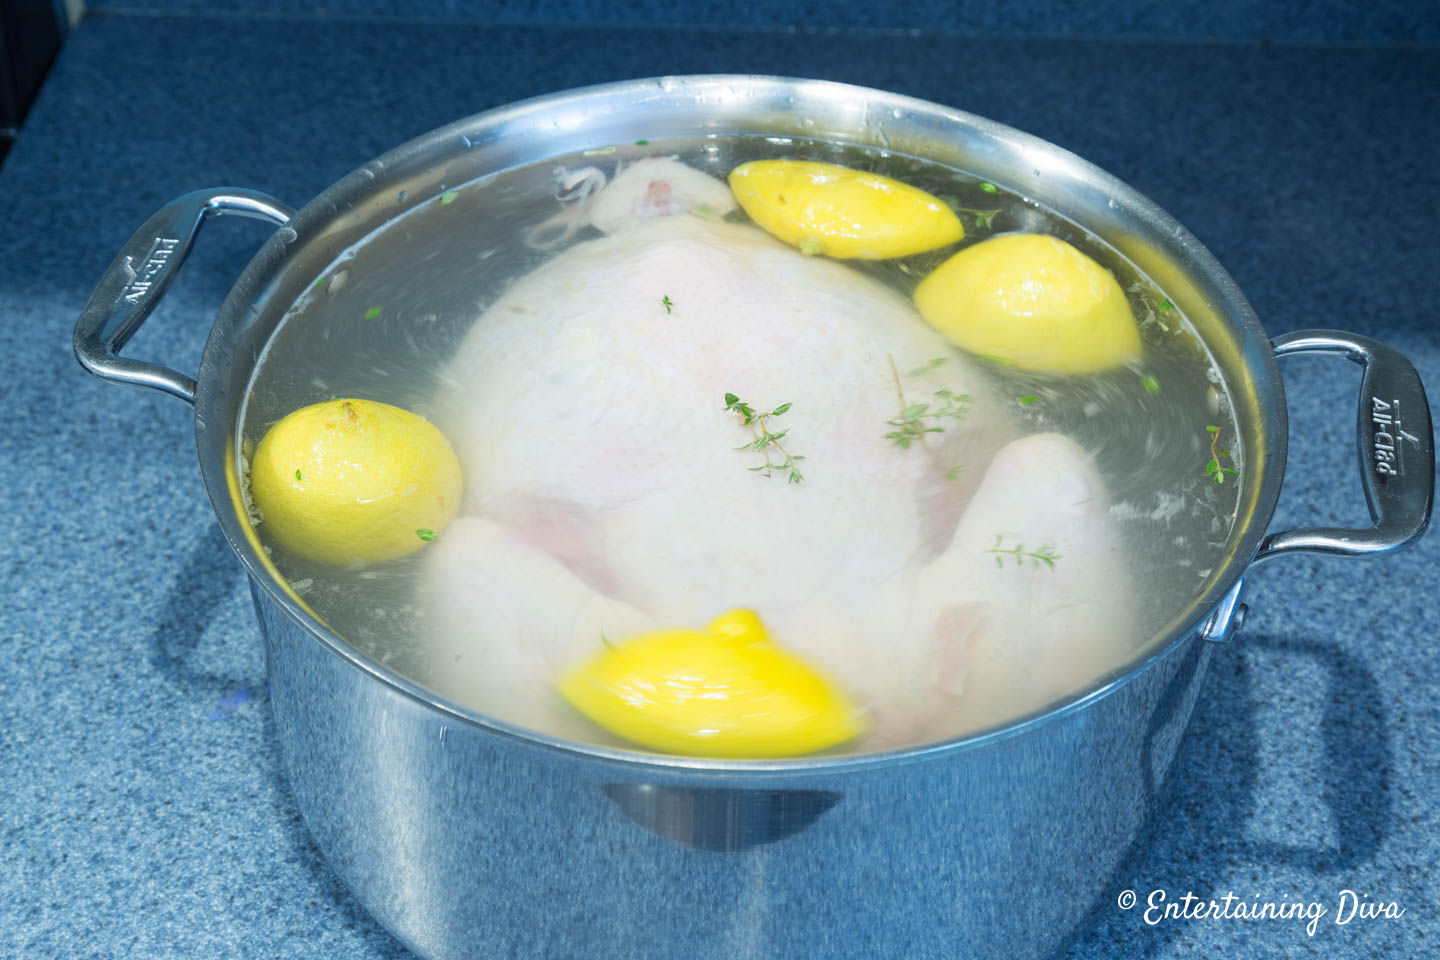 Chicken being brined in a large pot